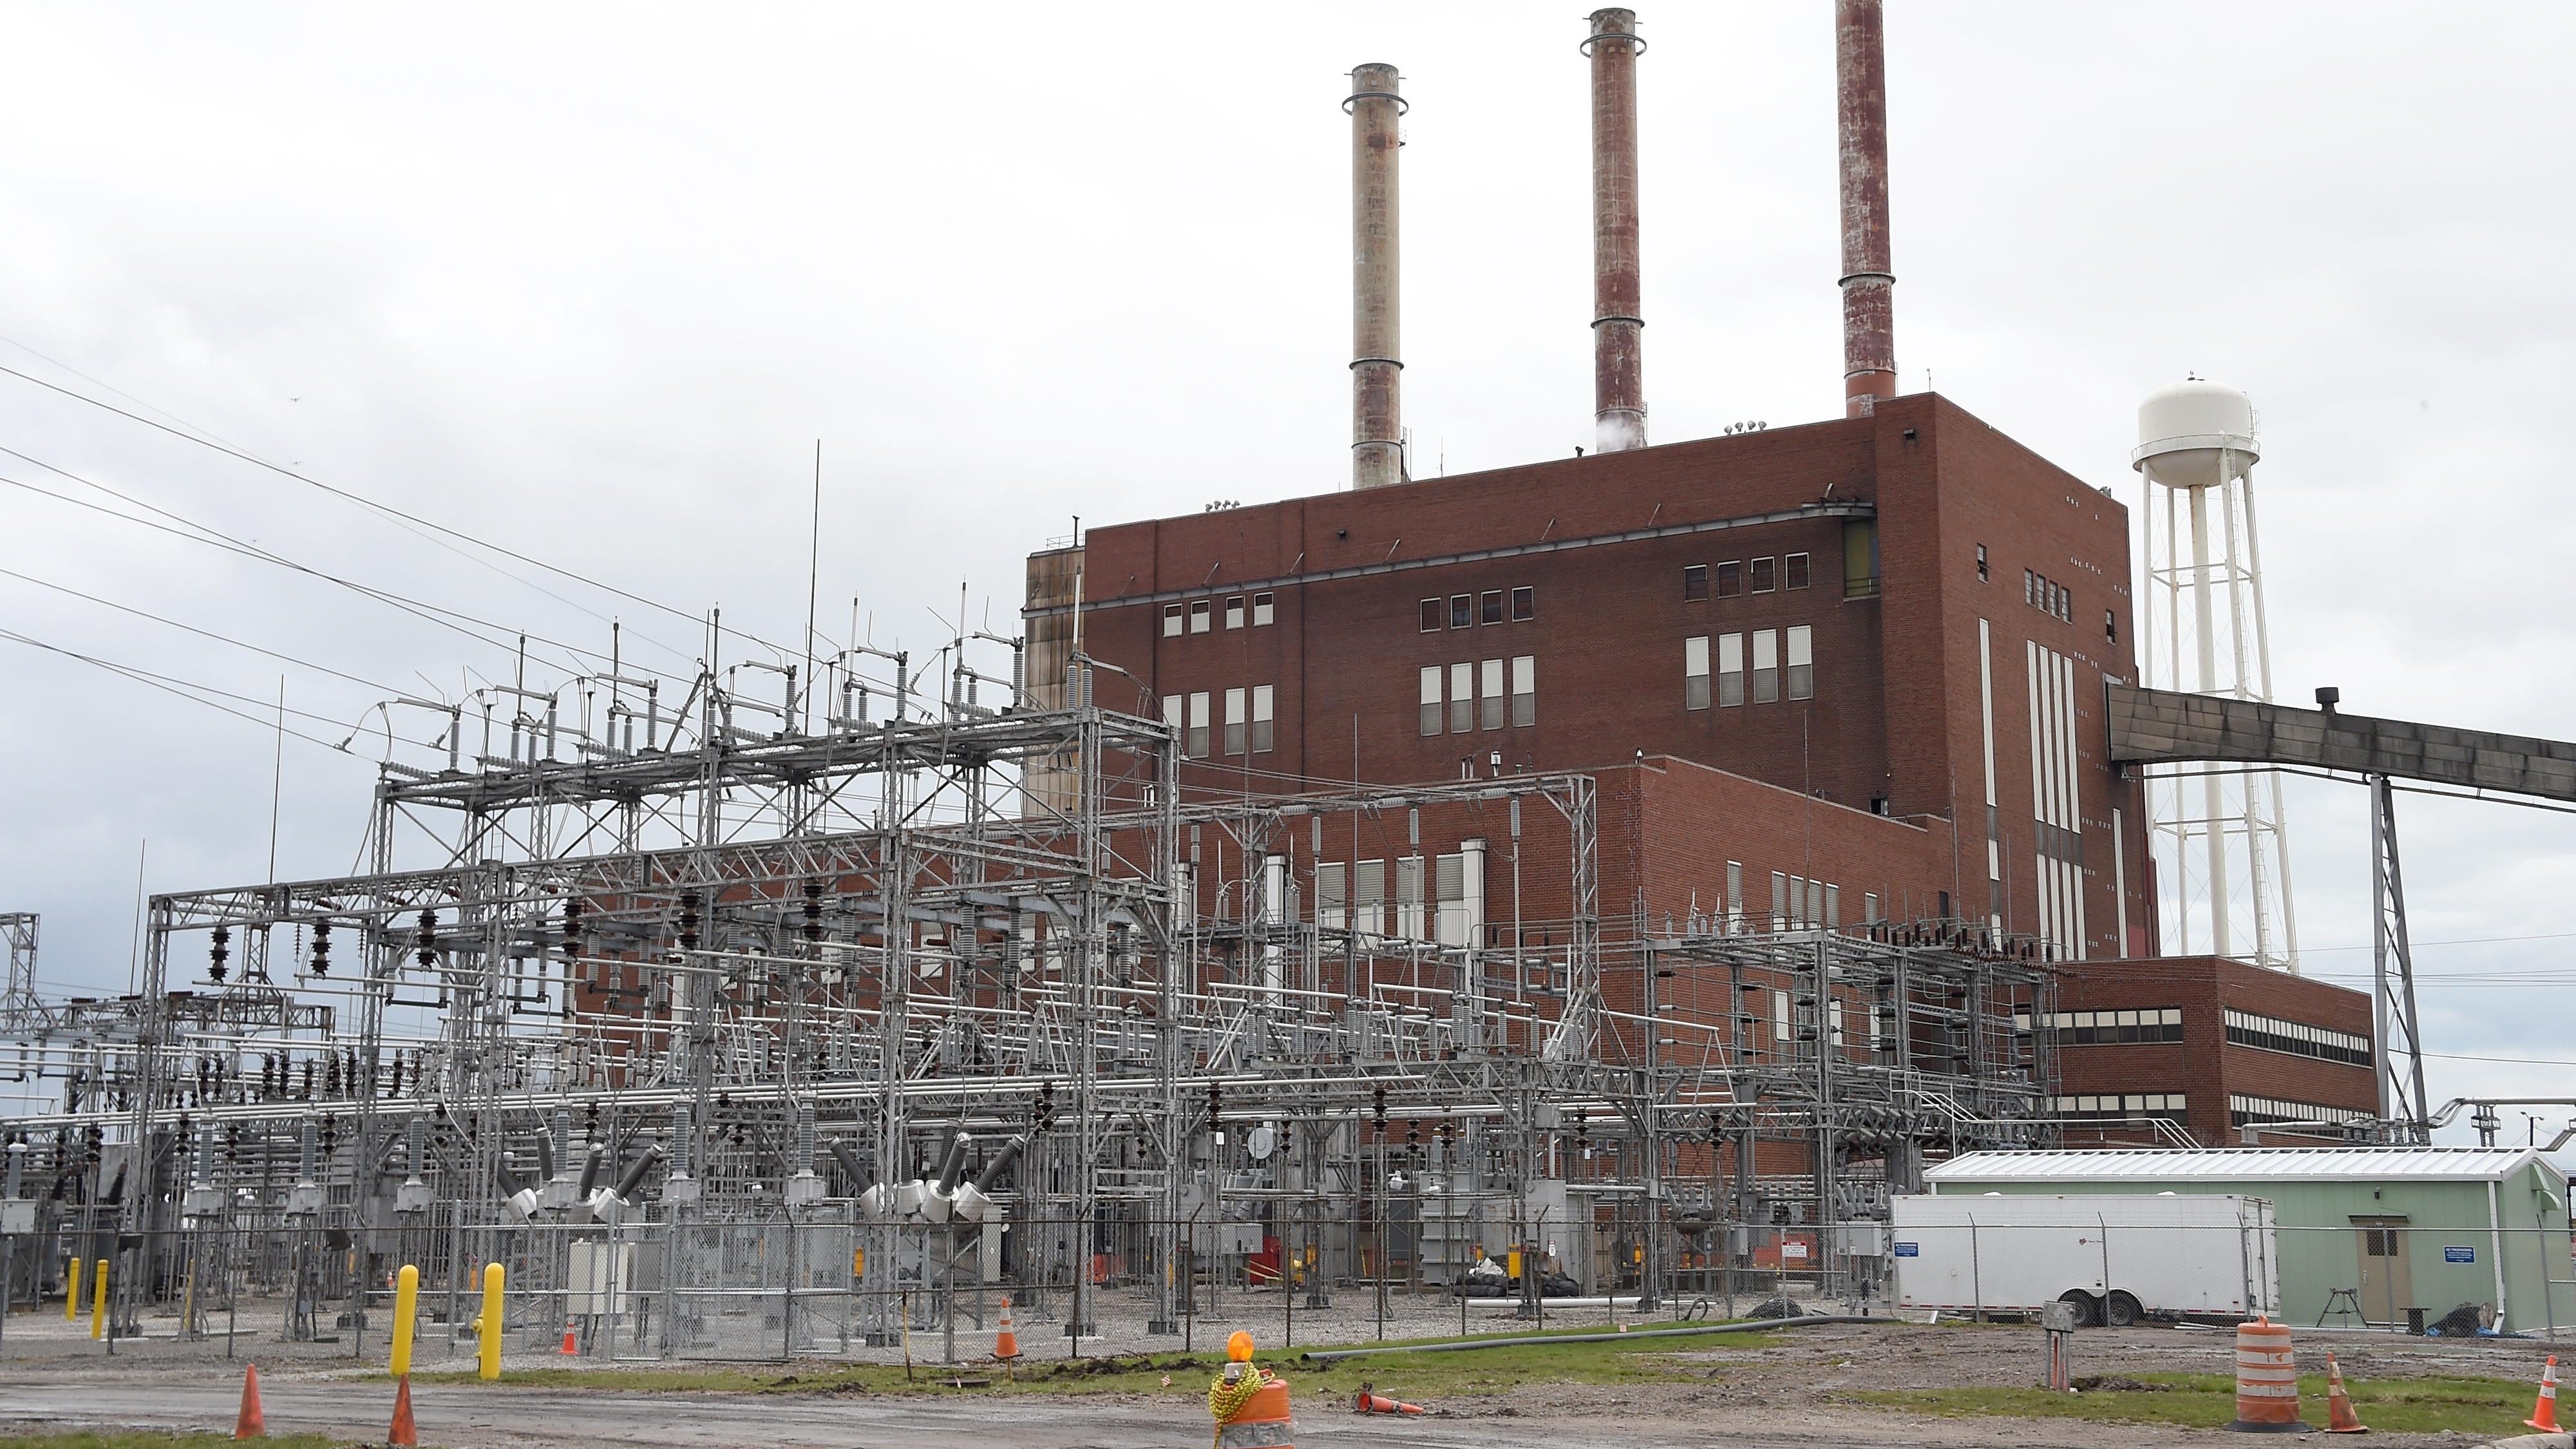 Consumers Energy said it is eliminating its use of coal for electricity and close five coal-fired power units by 2040. In 2016, the company closed the J.R. Whiting Generating Plant in Luna Pier along with seven other coal generators.